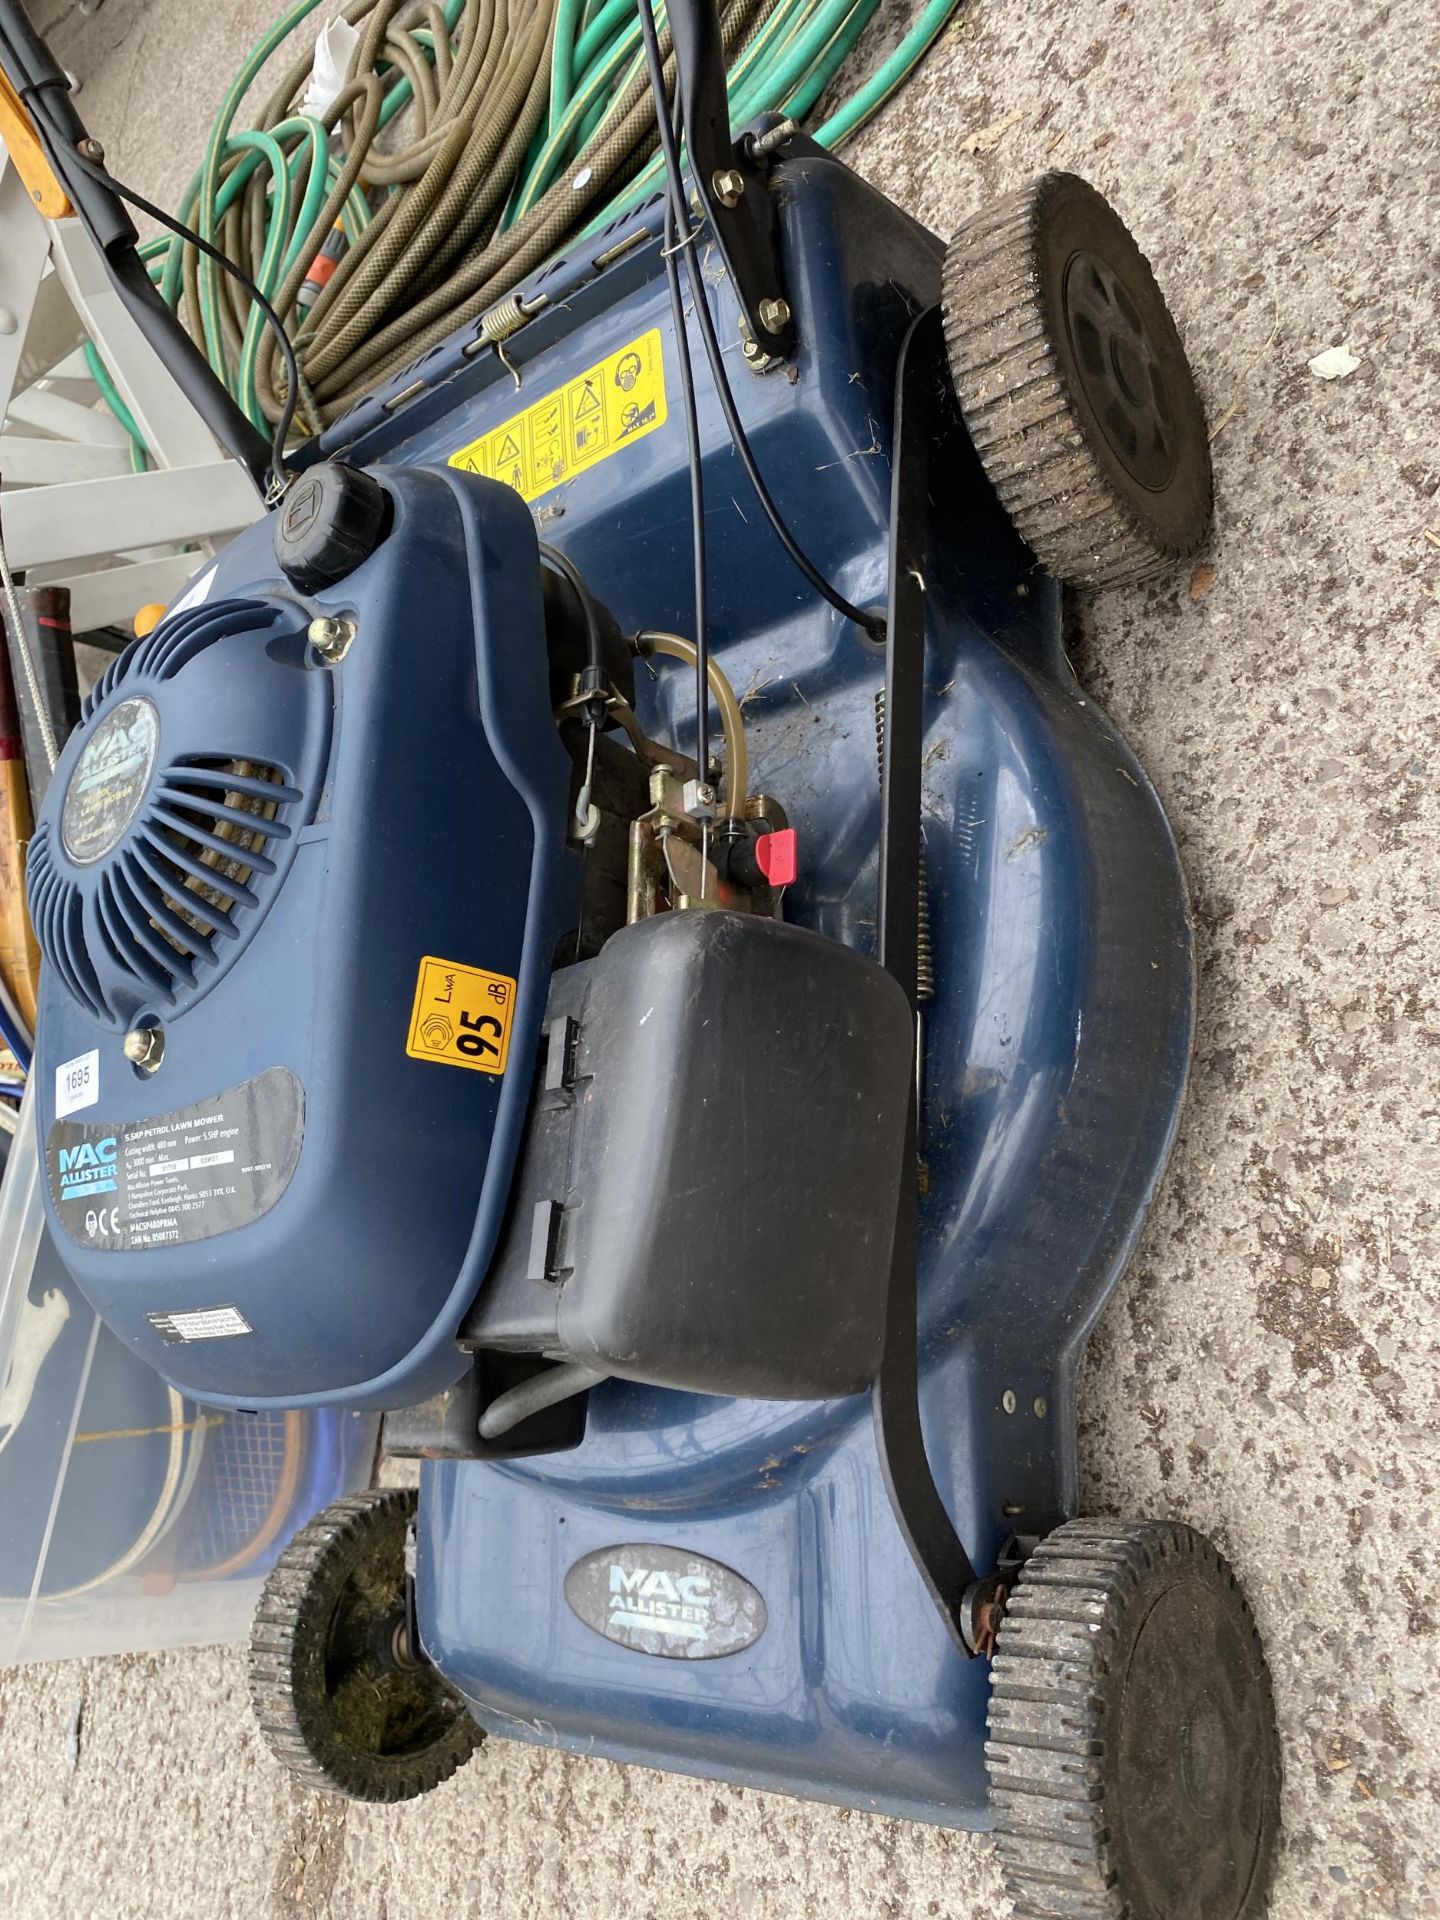 A MACALLISTER PETROL LAWN MOWER (LACKING GRASS BOX) - Image 2 of 3